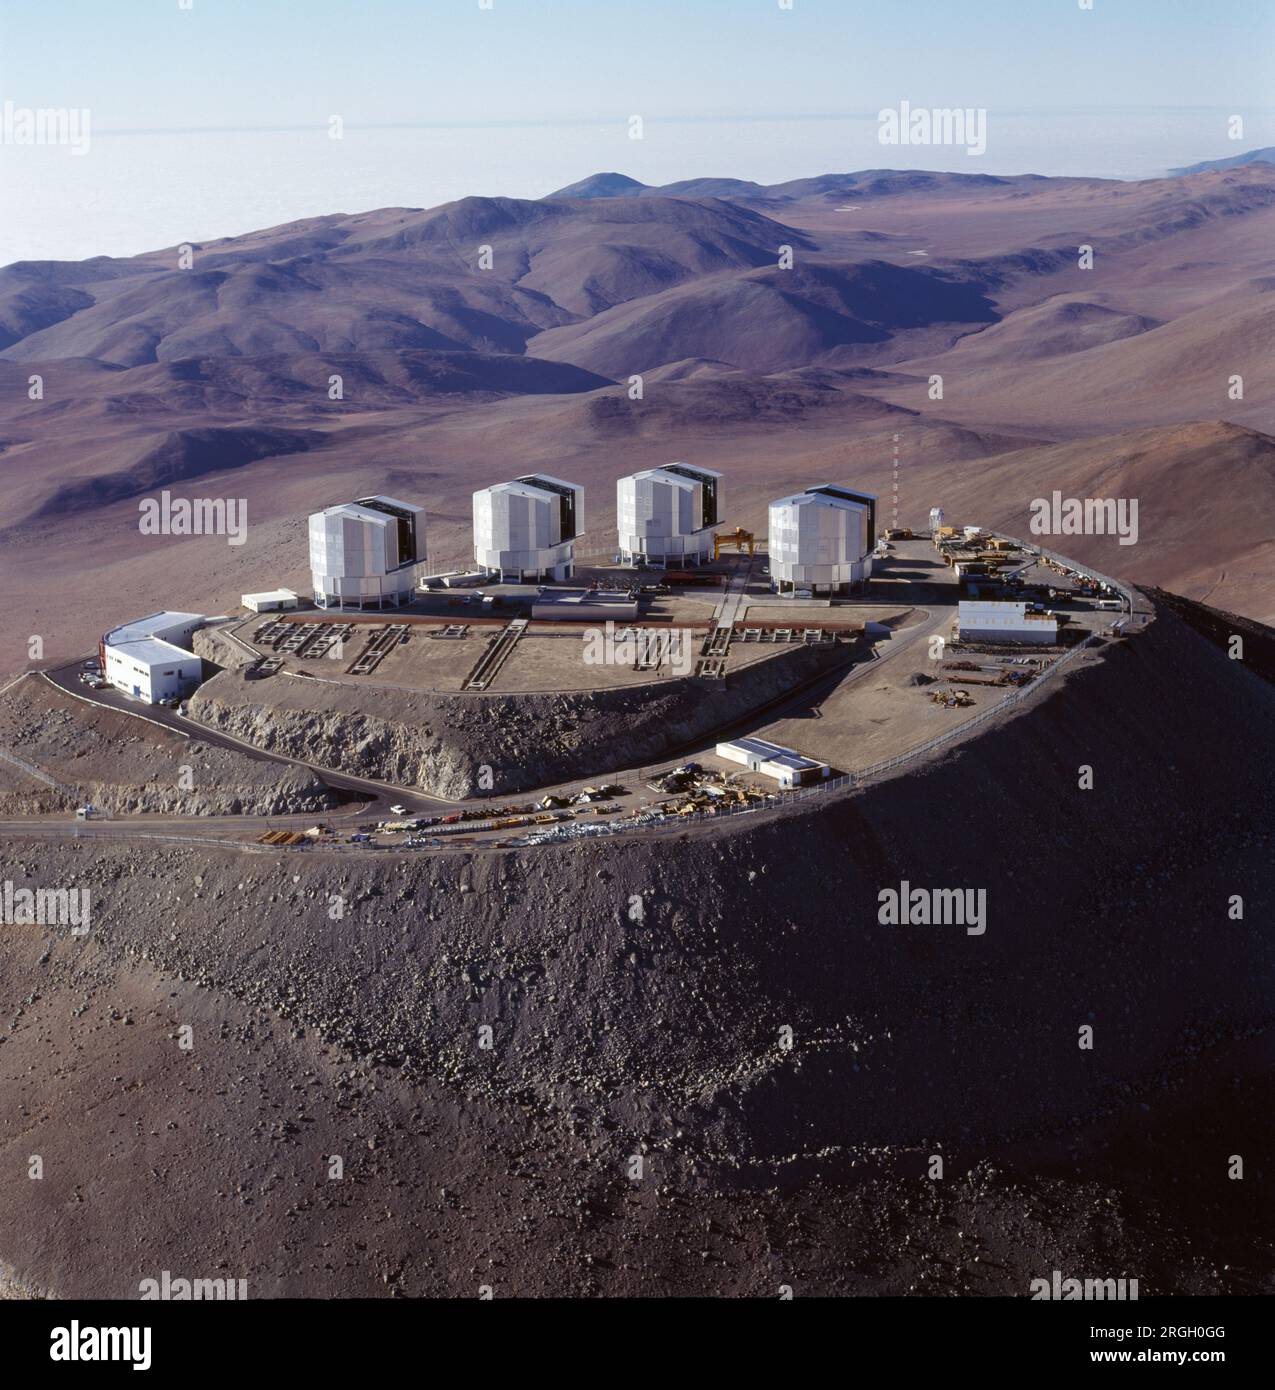 Paranal Observatory on a mountain in the Atacama Desert of Chile Stock Photo